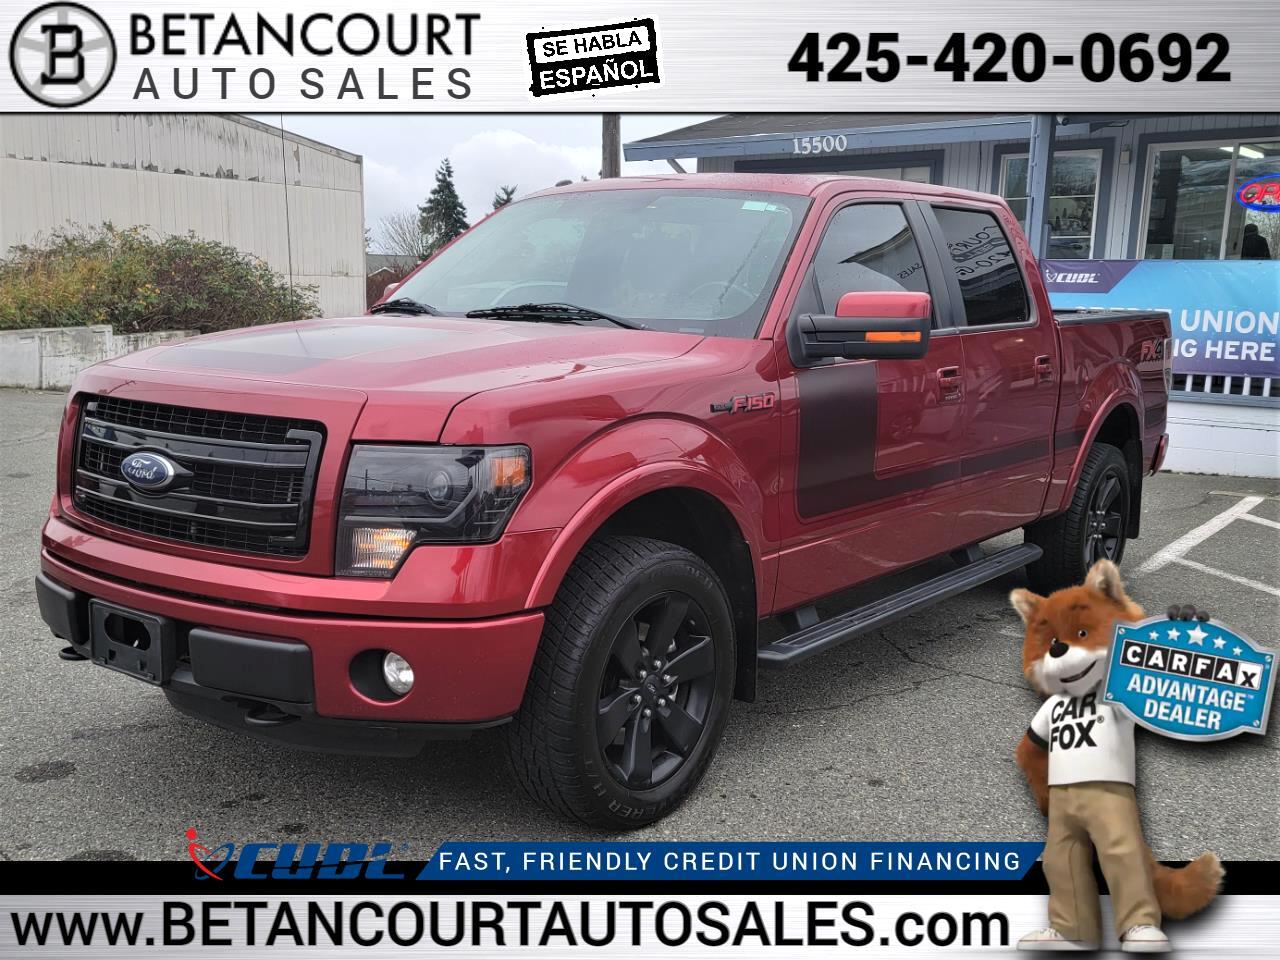 2013 Ford F-150 4WD SuperCrew 157" FX4